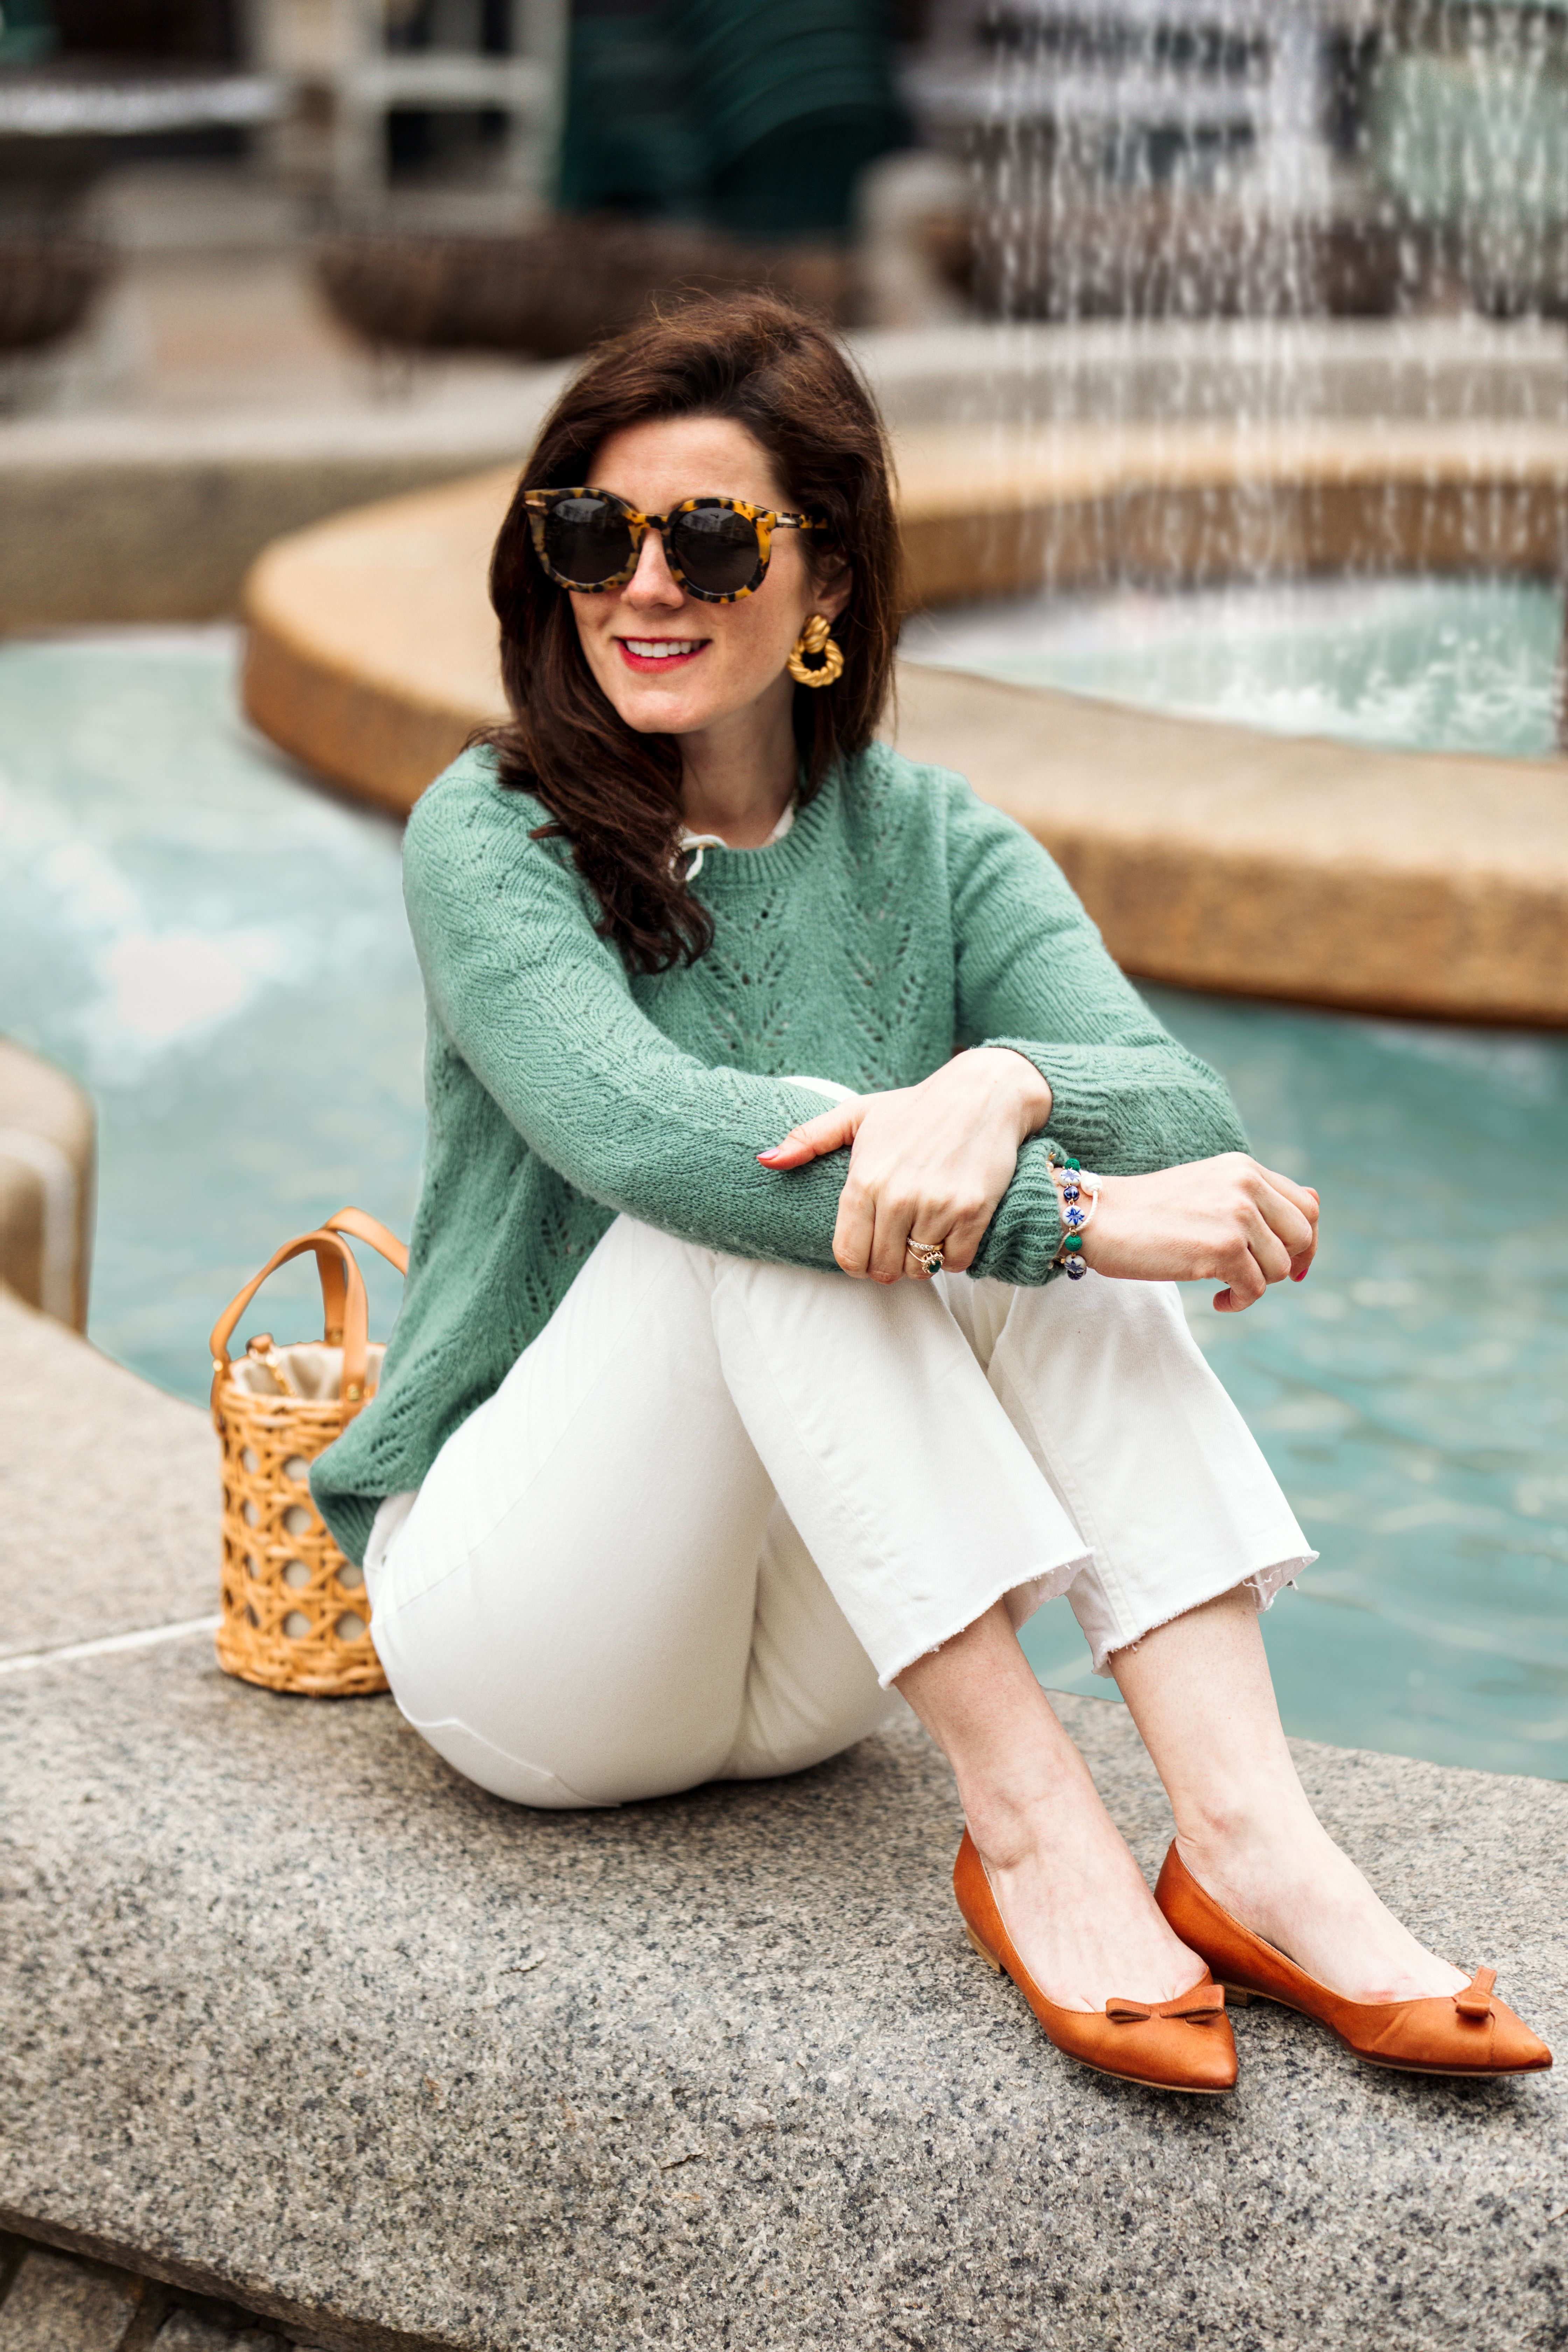 My Everyday Shoes - Classy Girls Wear Pearls -   18 style Preppy chic ideas